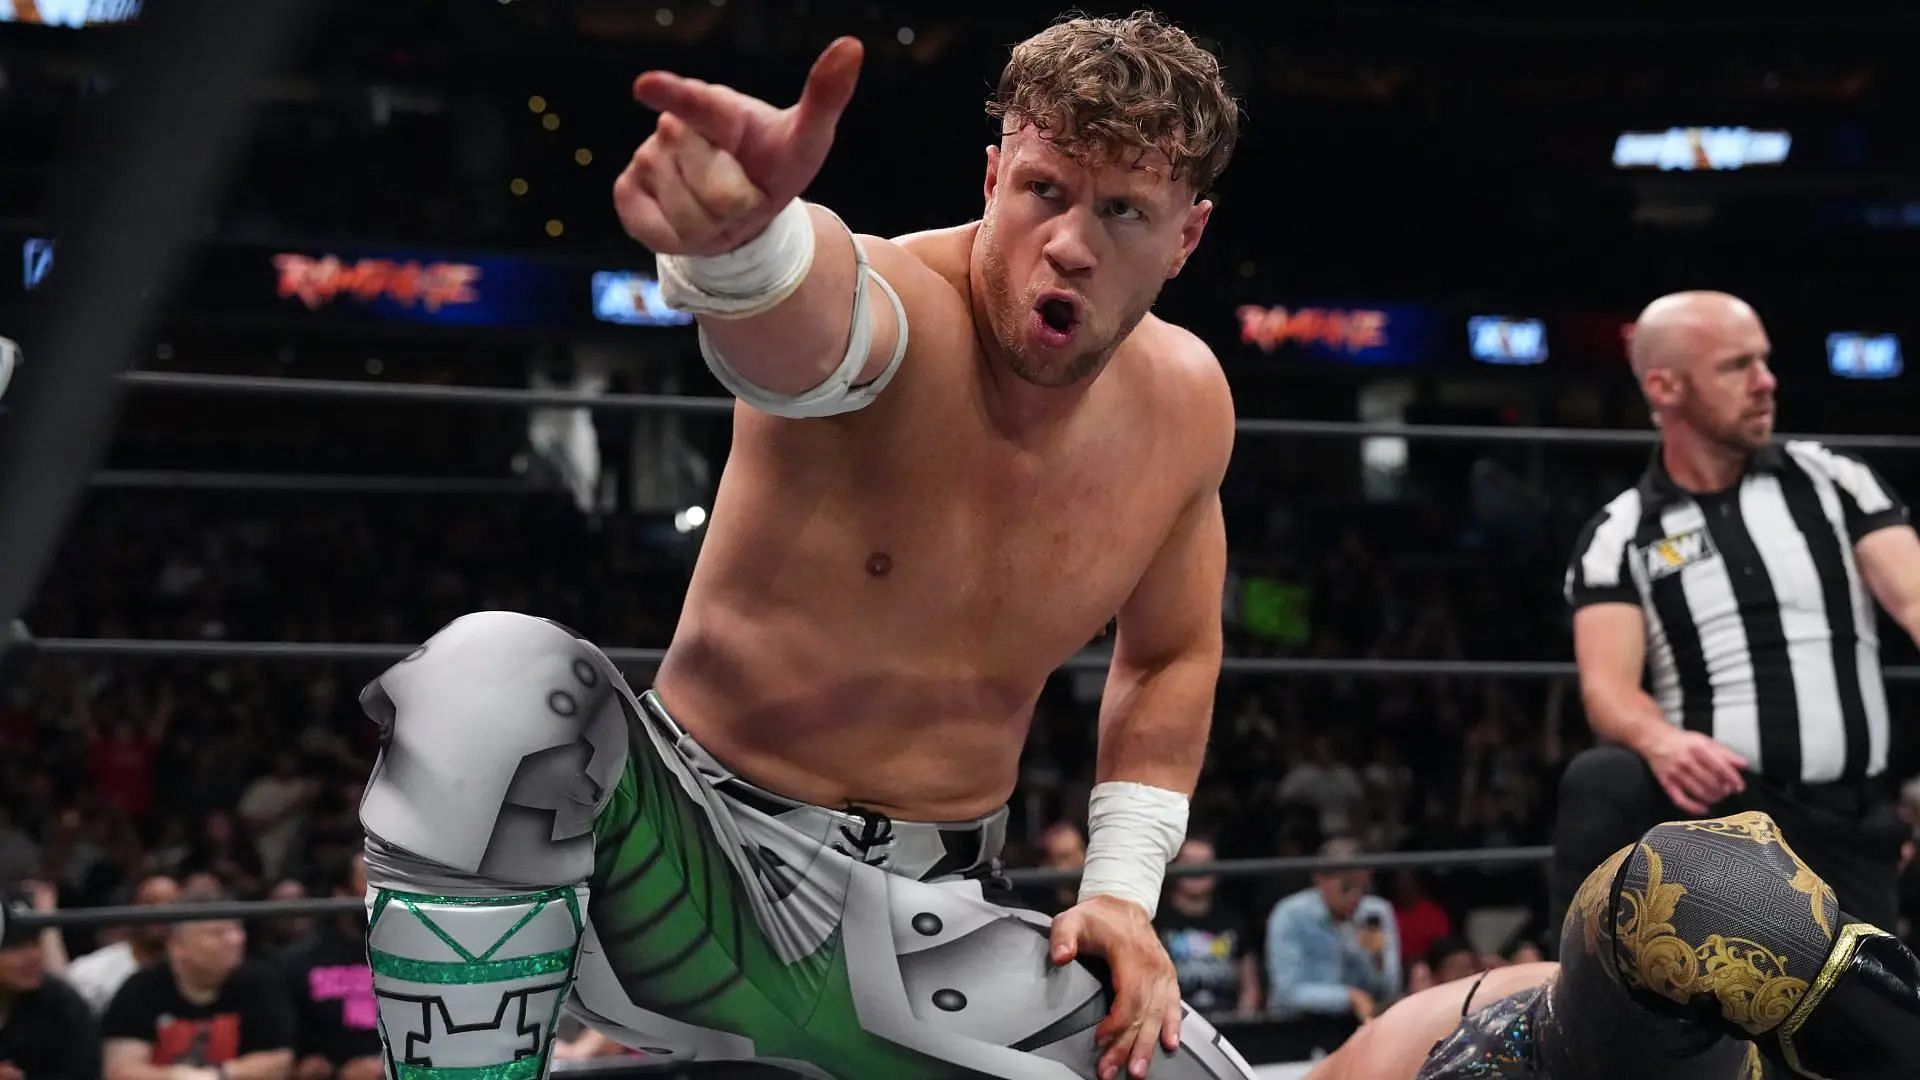 Will Ospreay has some major challenges lined up